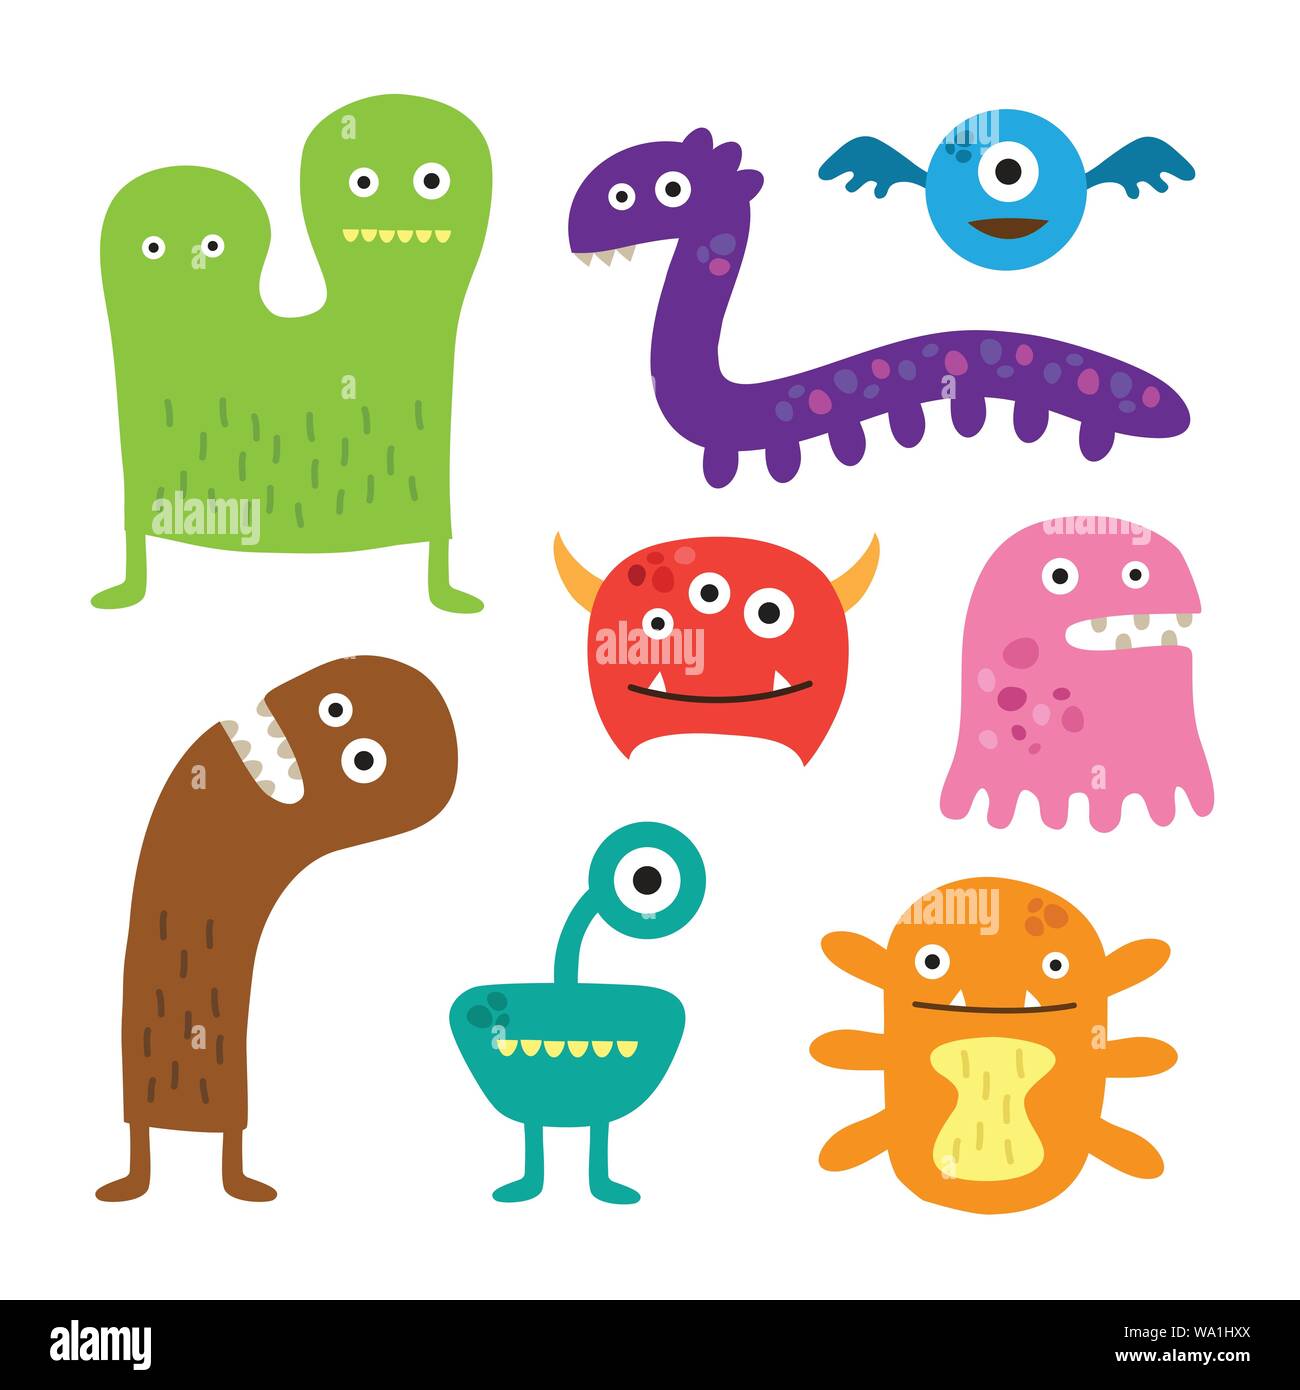 Cool monsters icons collection. Isolaet object. Vector illustration Stock Vector